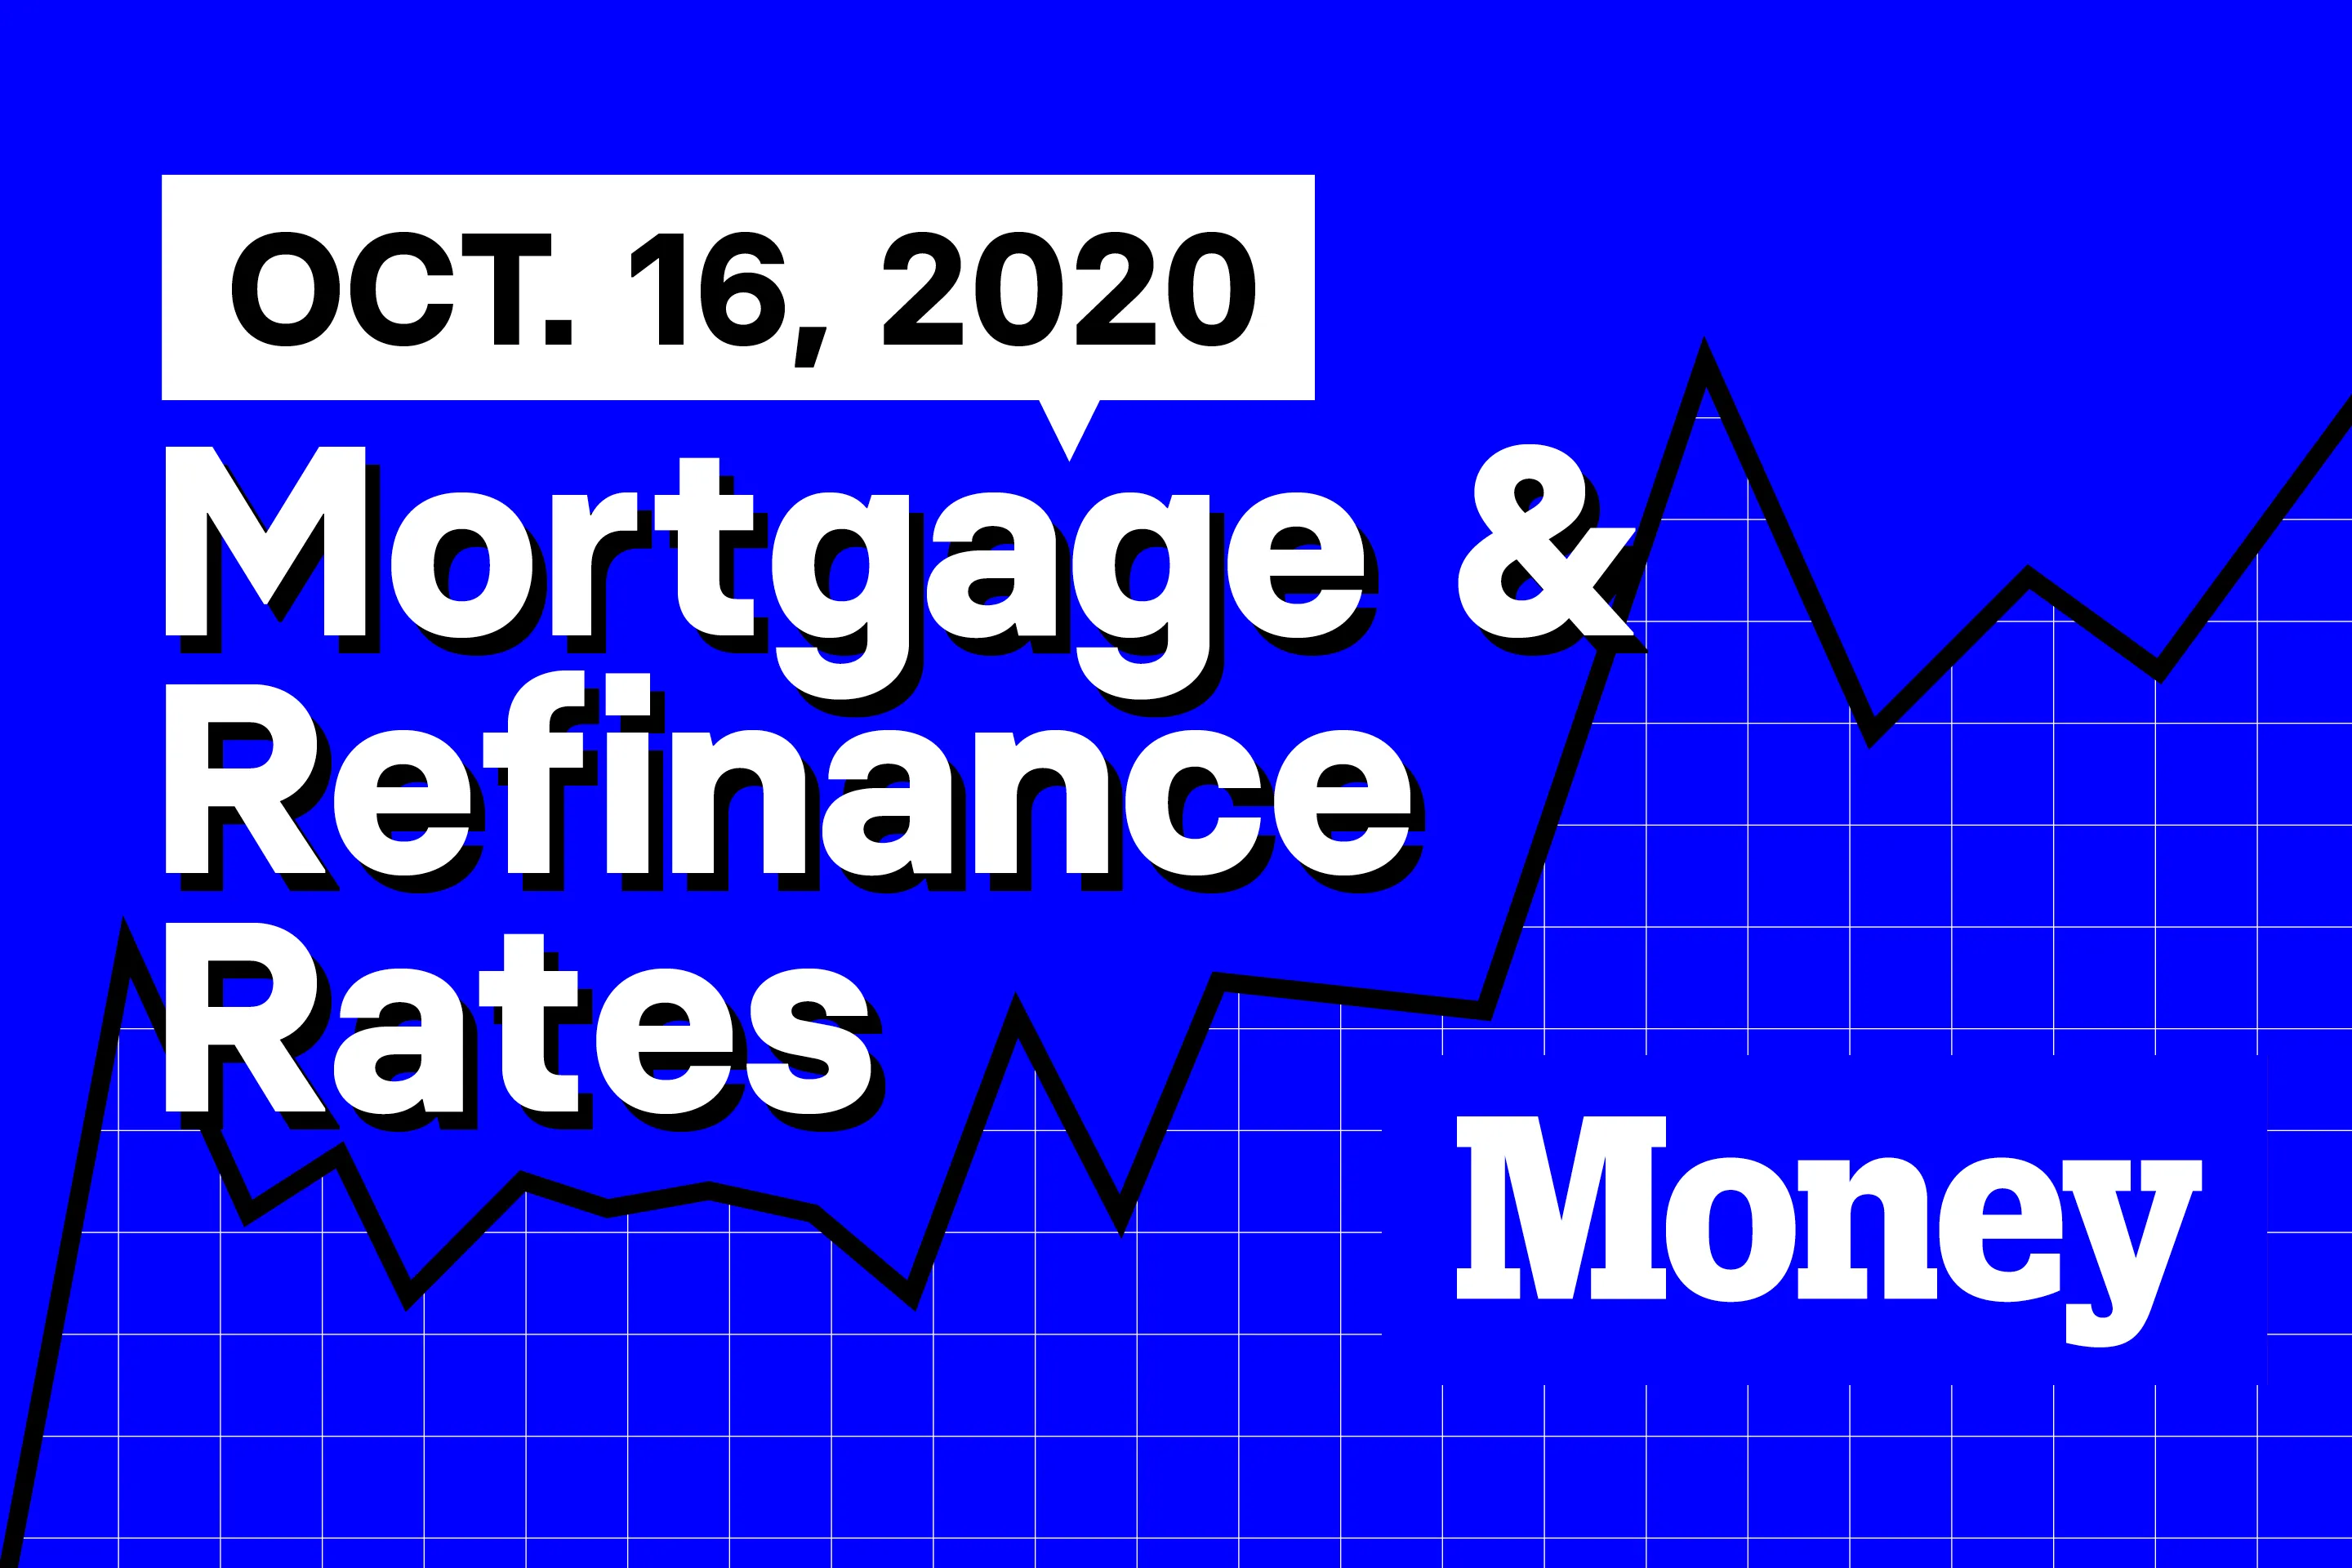 Here Are Today's Best Mortgage & Refinance Rates for October 16, 2020